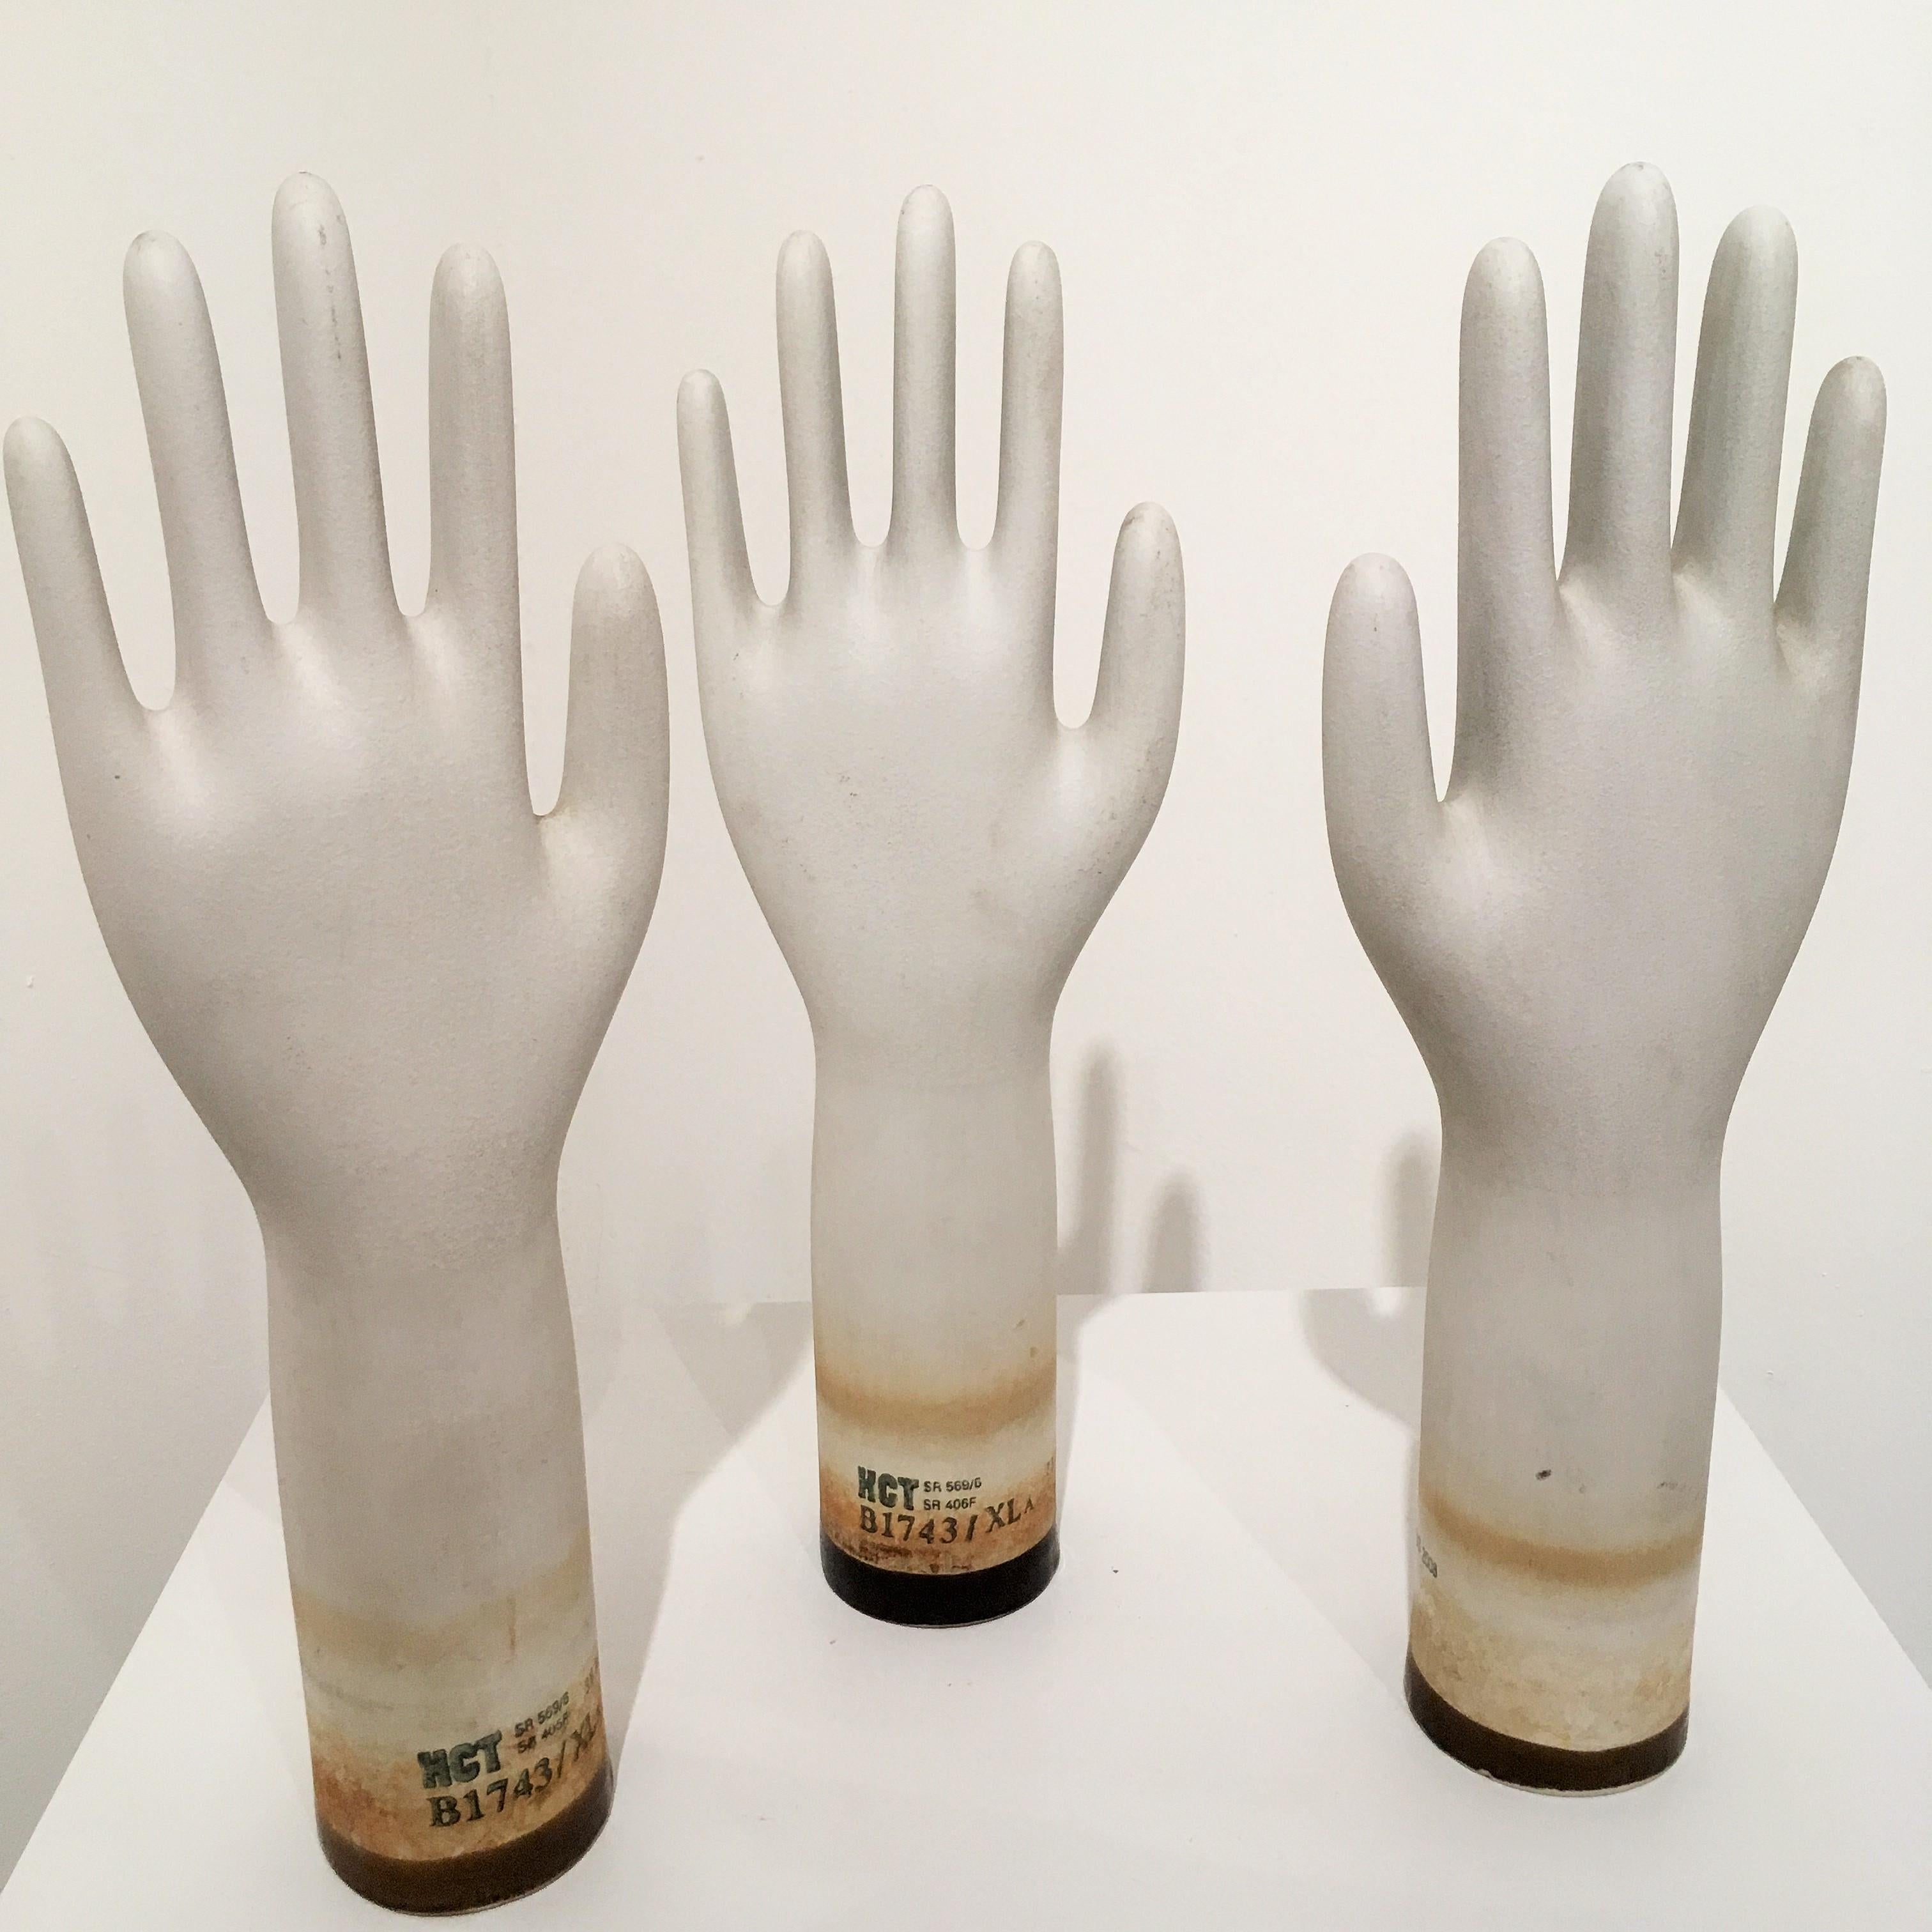 North American Set of Three Ceramic Glove Molds, 2008 For Sale